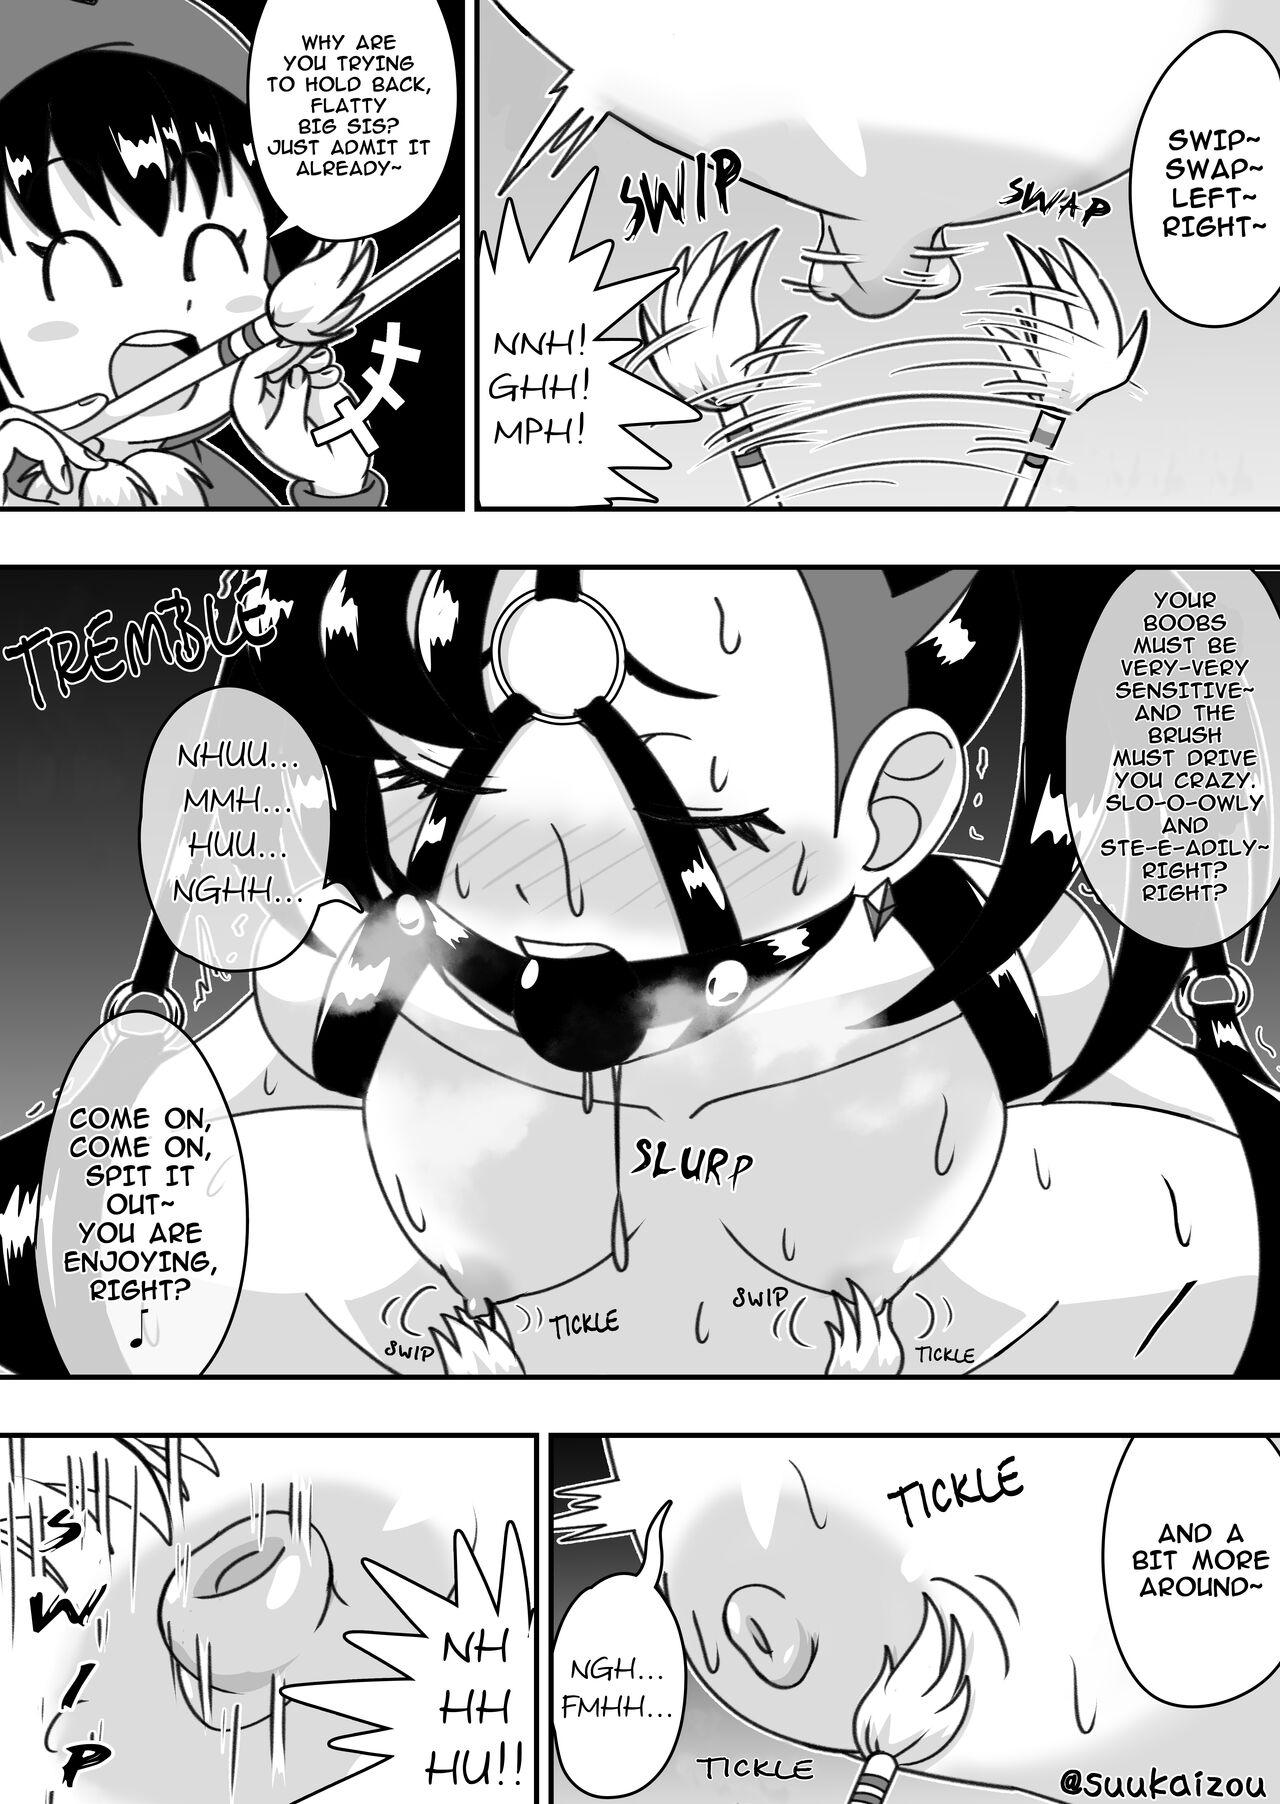 No Condom Marie-chan punishment started - Pokemon | pocket monsters Brother - Page 11